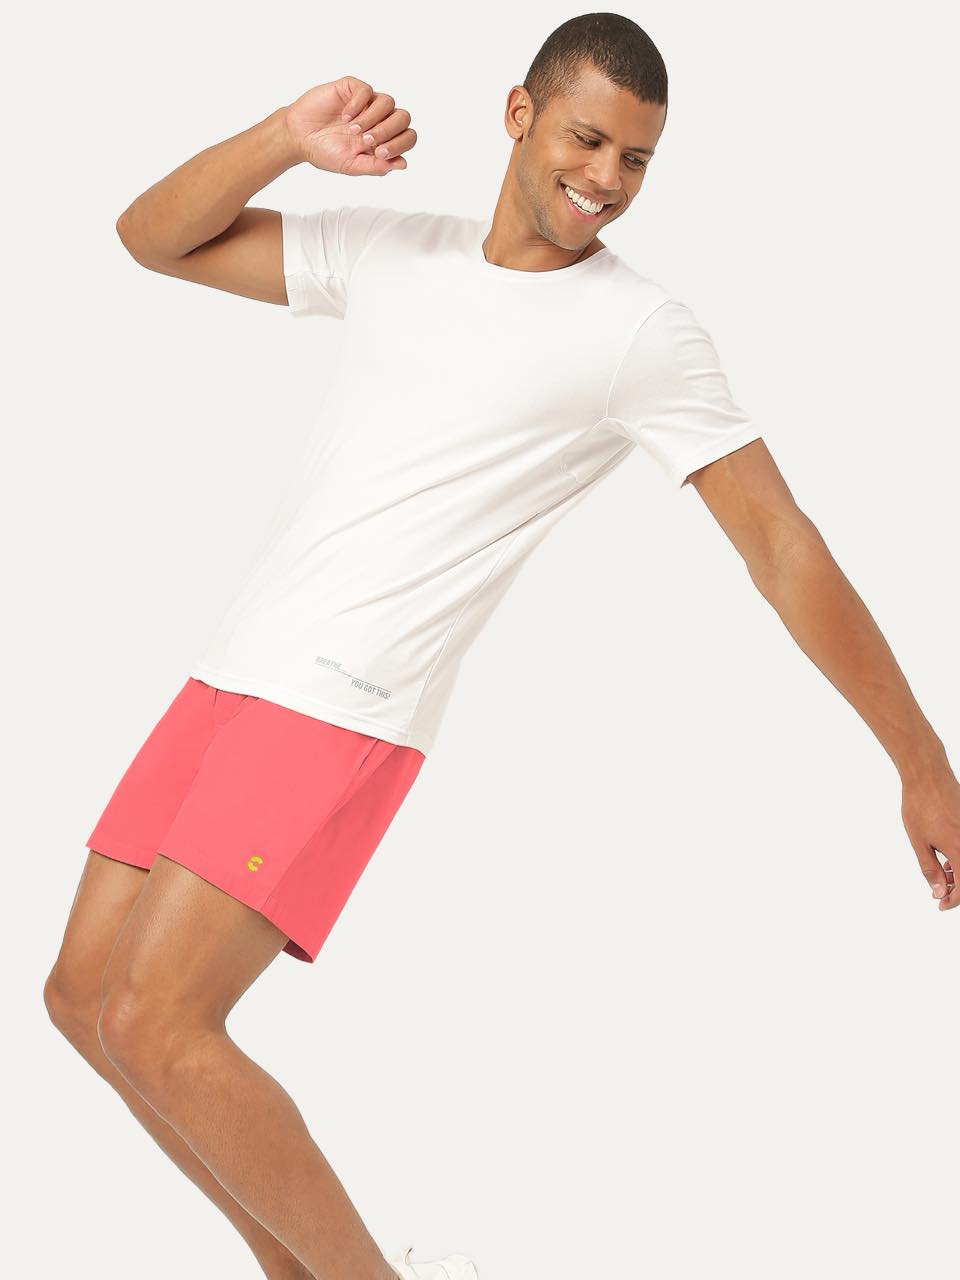 All-Day Boxer Shorts - (Pack of 1)